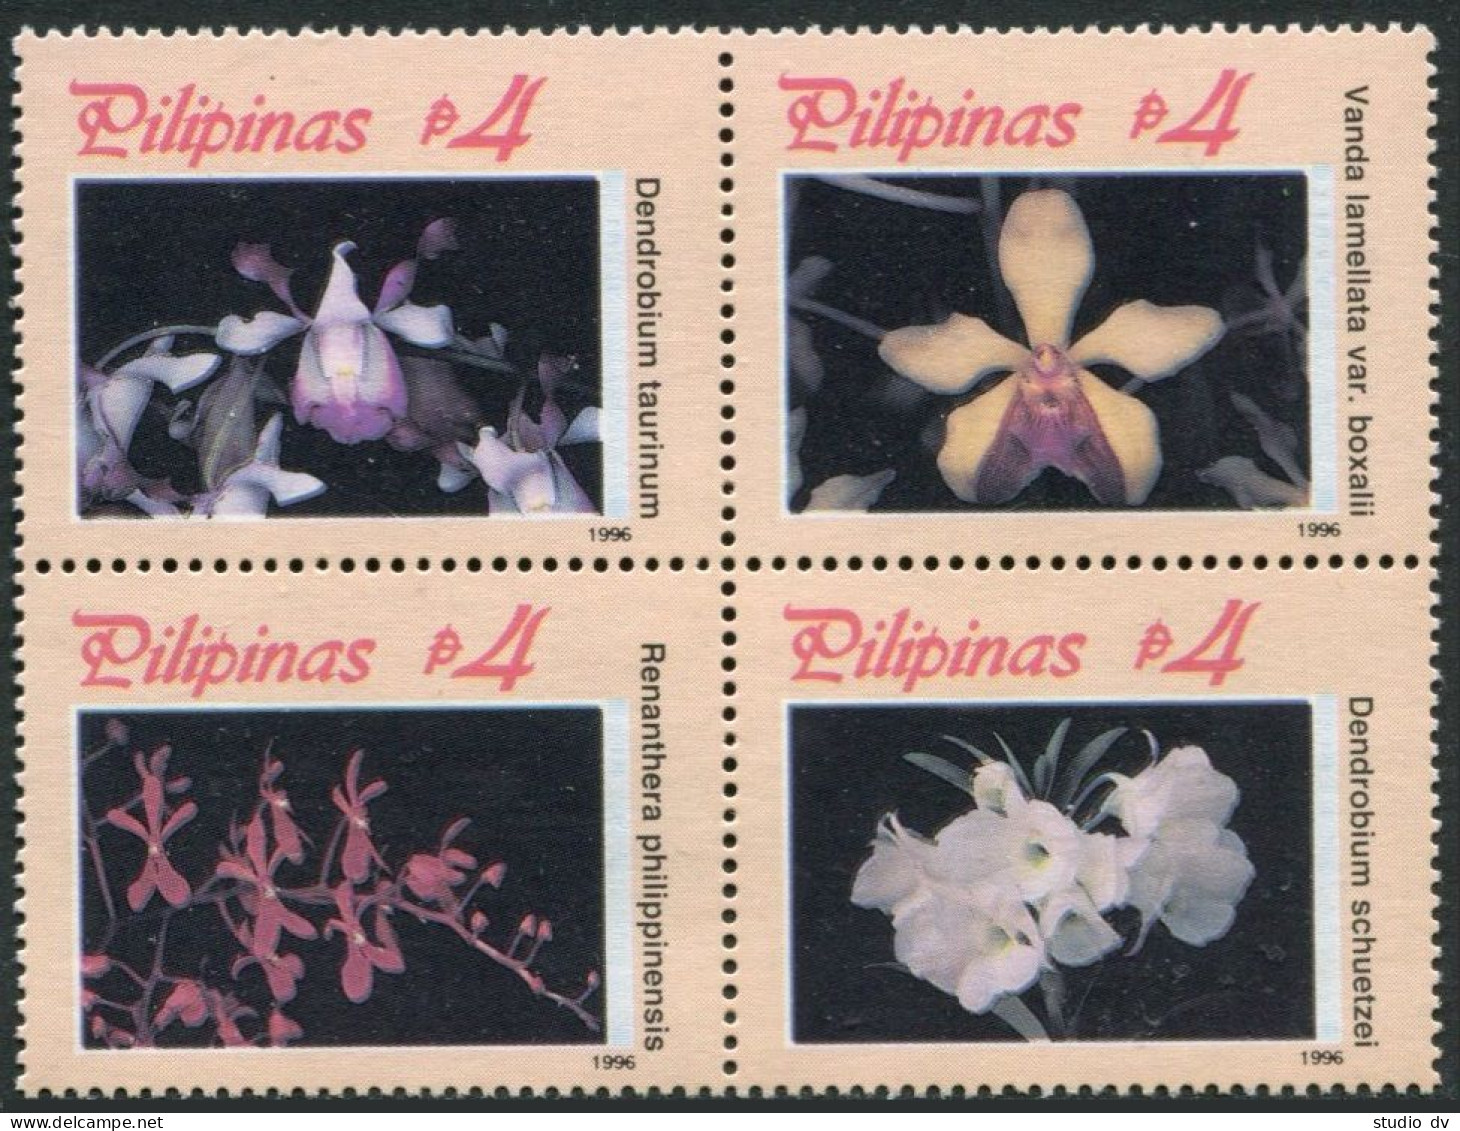 Philippines 2428-2429 Ad Block,2430 Sheet,MNH. Orchids.ASEANPEX-1996. - Philippines